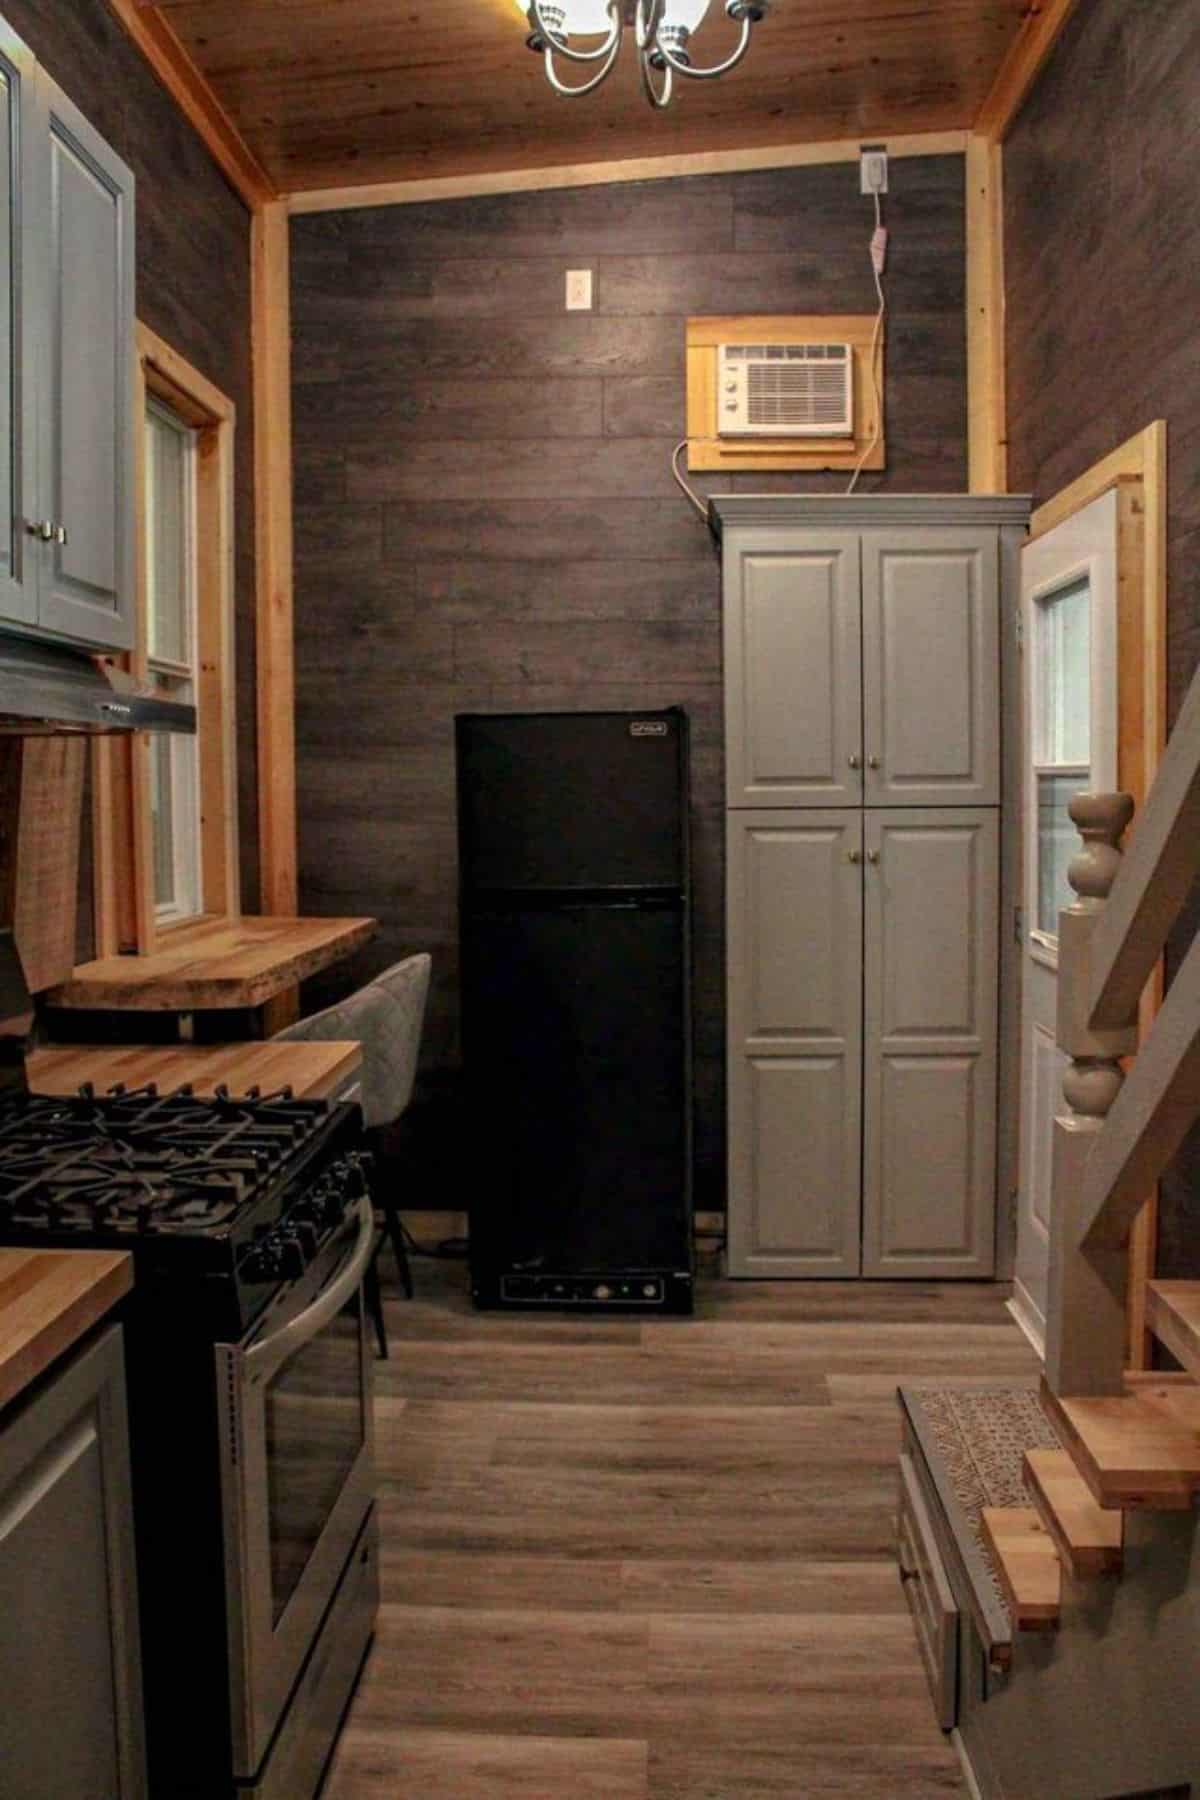 storage cabinets besides refrigerator in the living area of beautiful tiny house